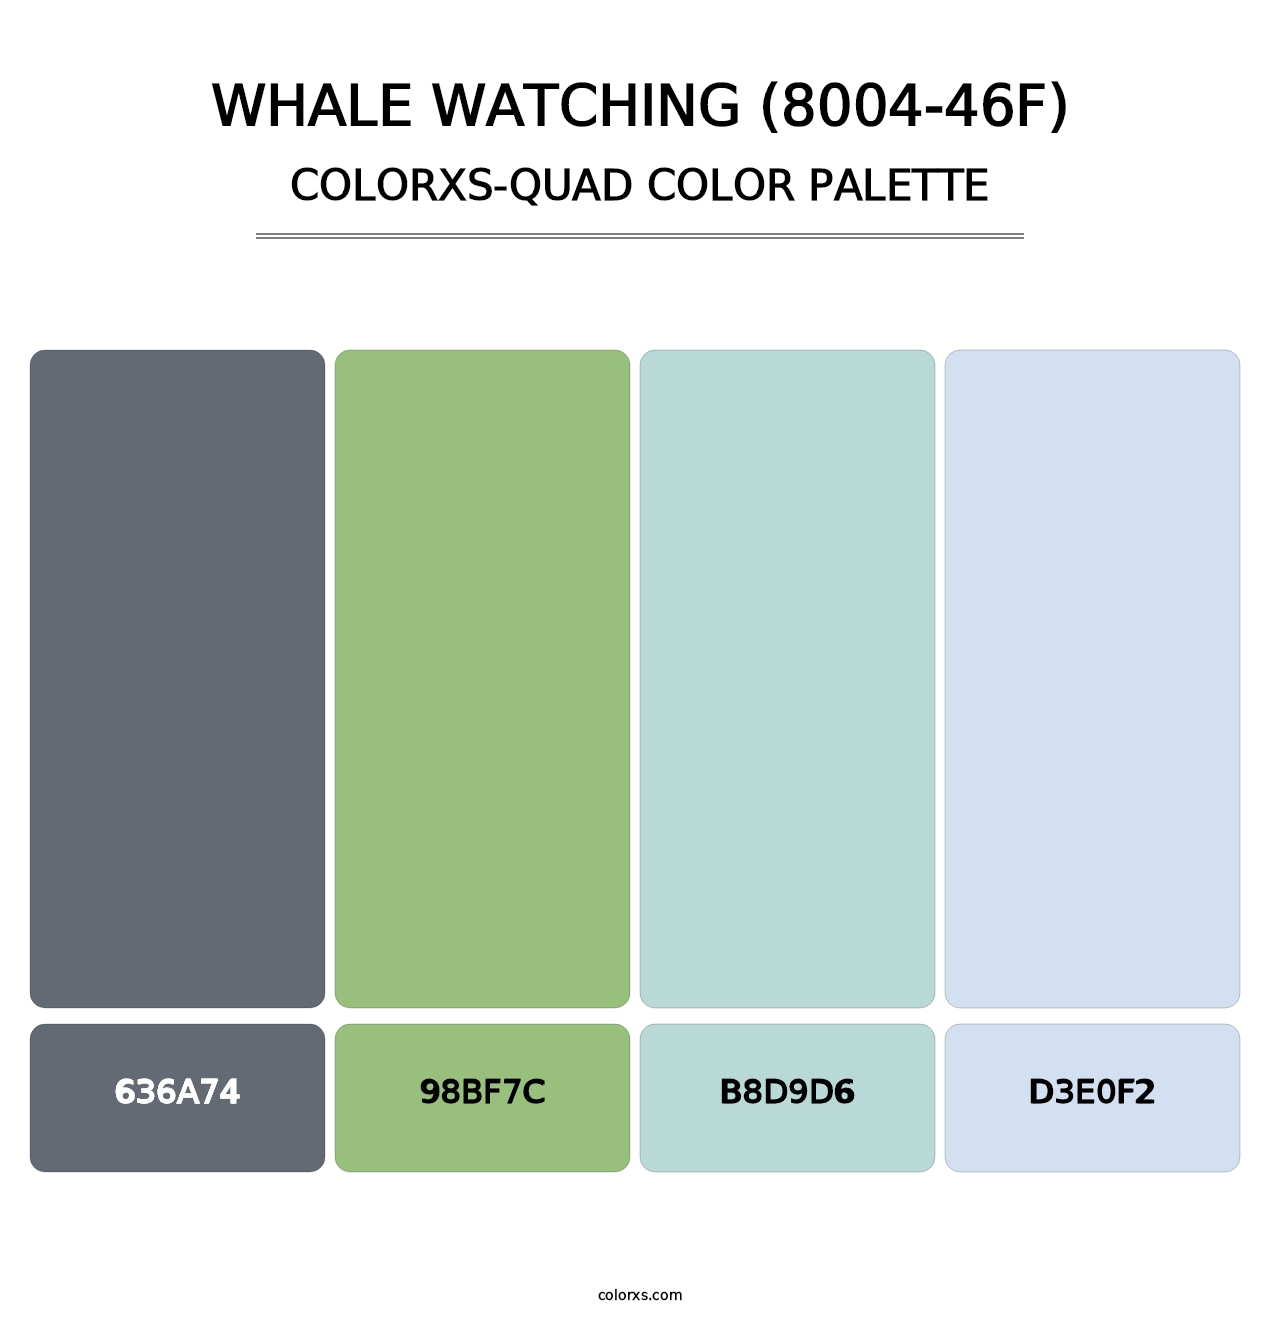 Whale Watching (8004-46F) - Colorxs Quad Palette